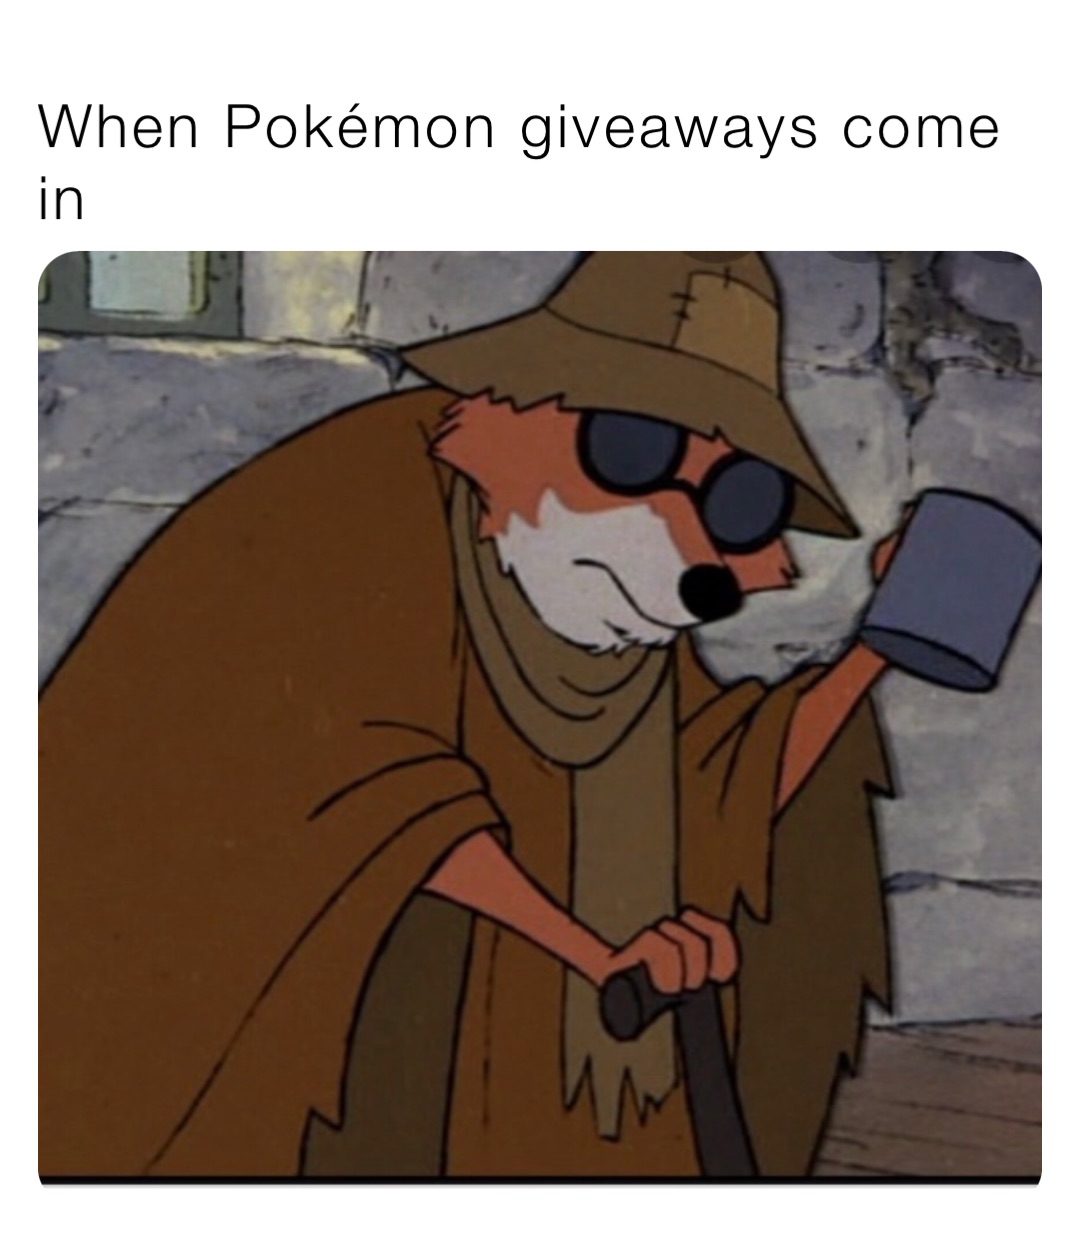 When Pokémon giveaways come in